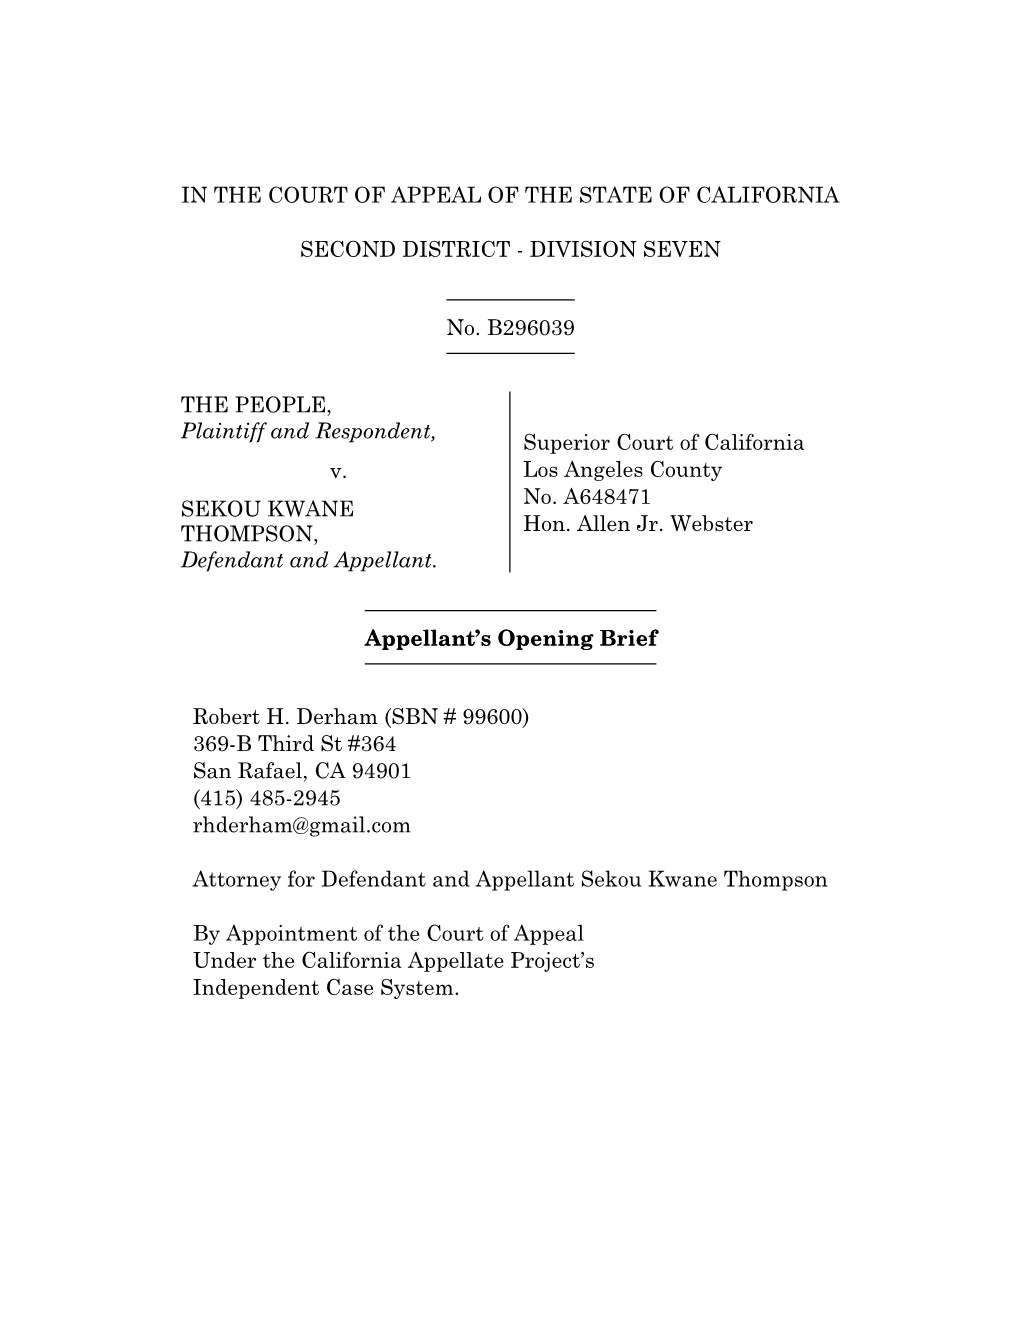 In the Court of Appeal of the State of California Second